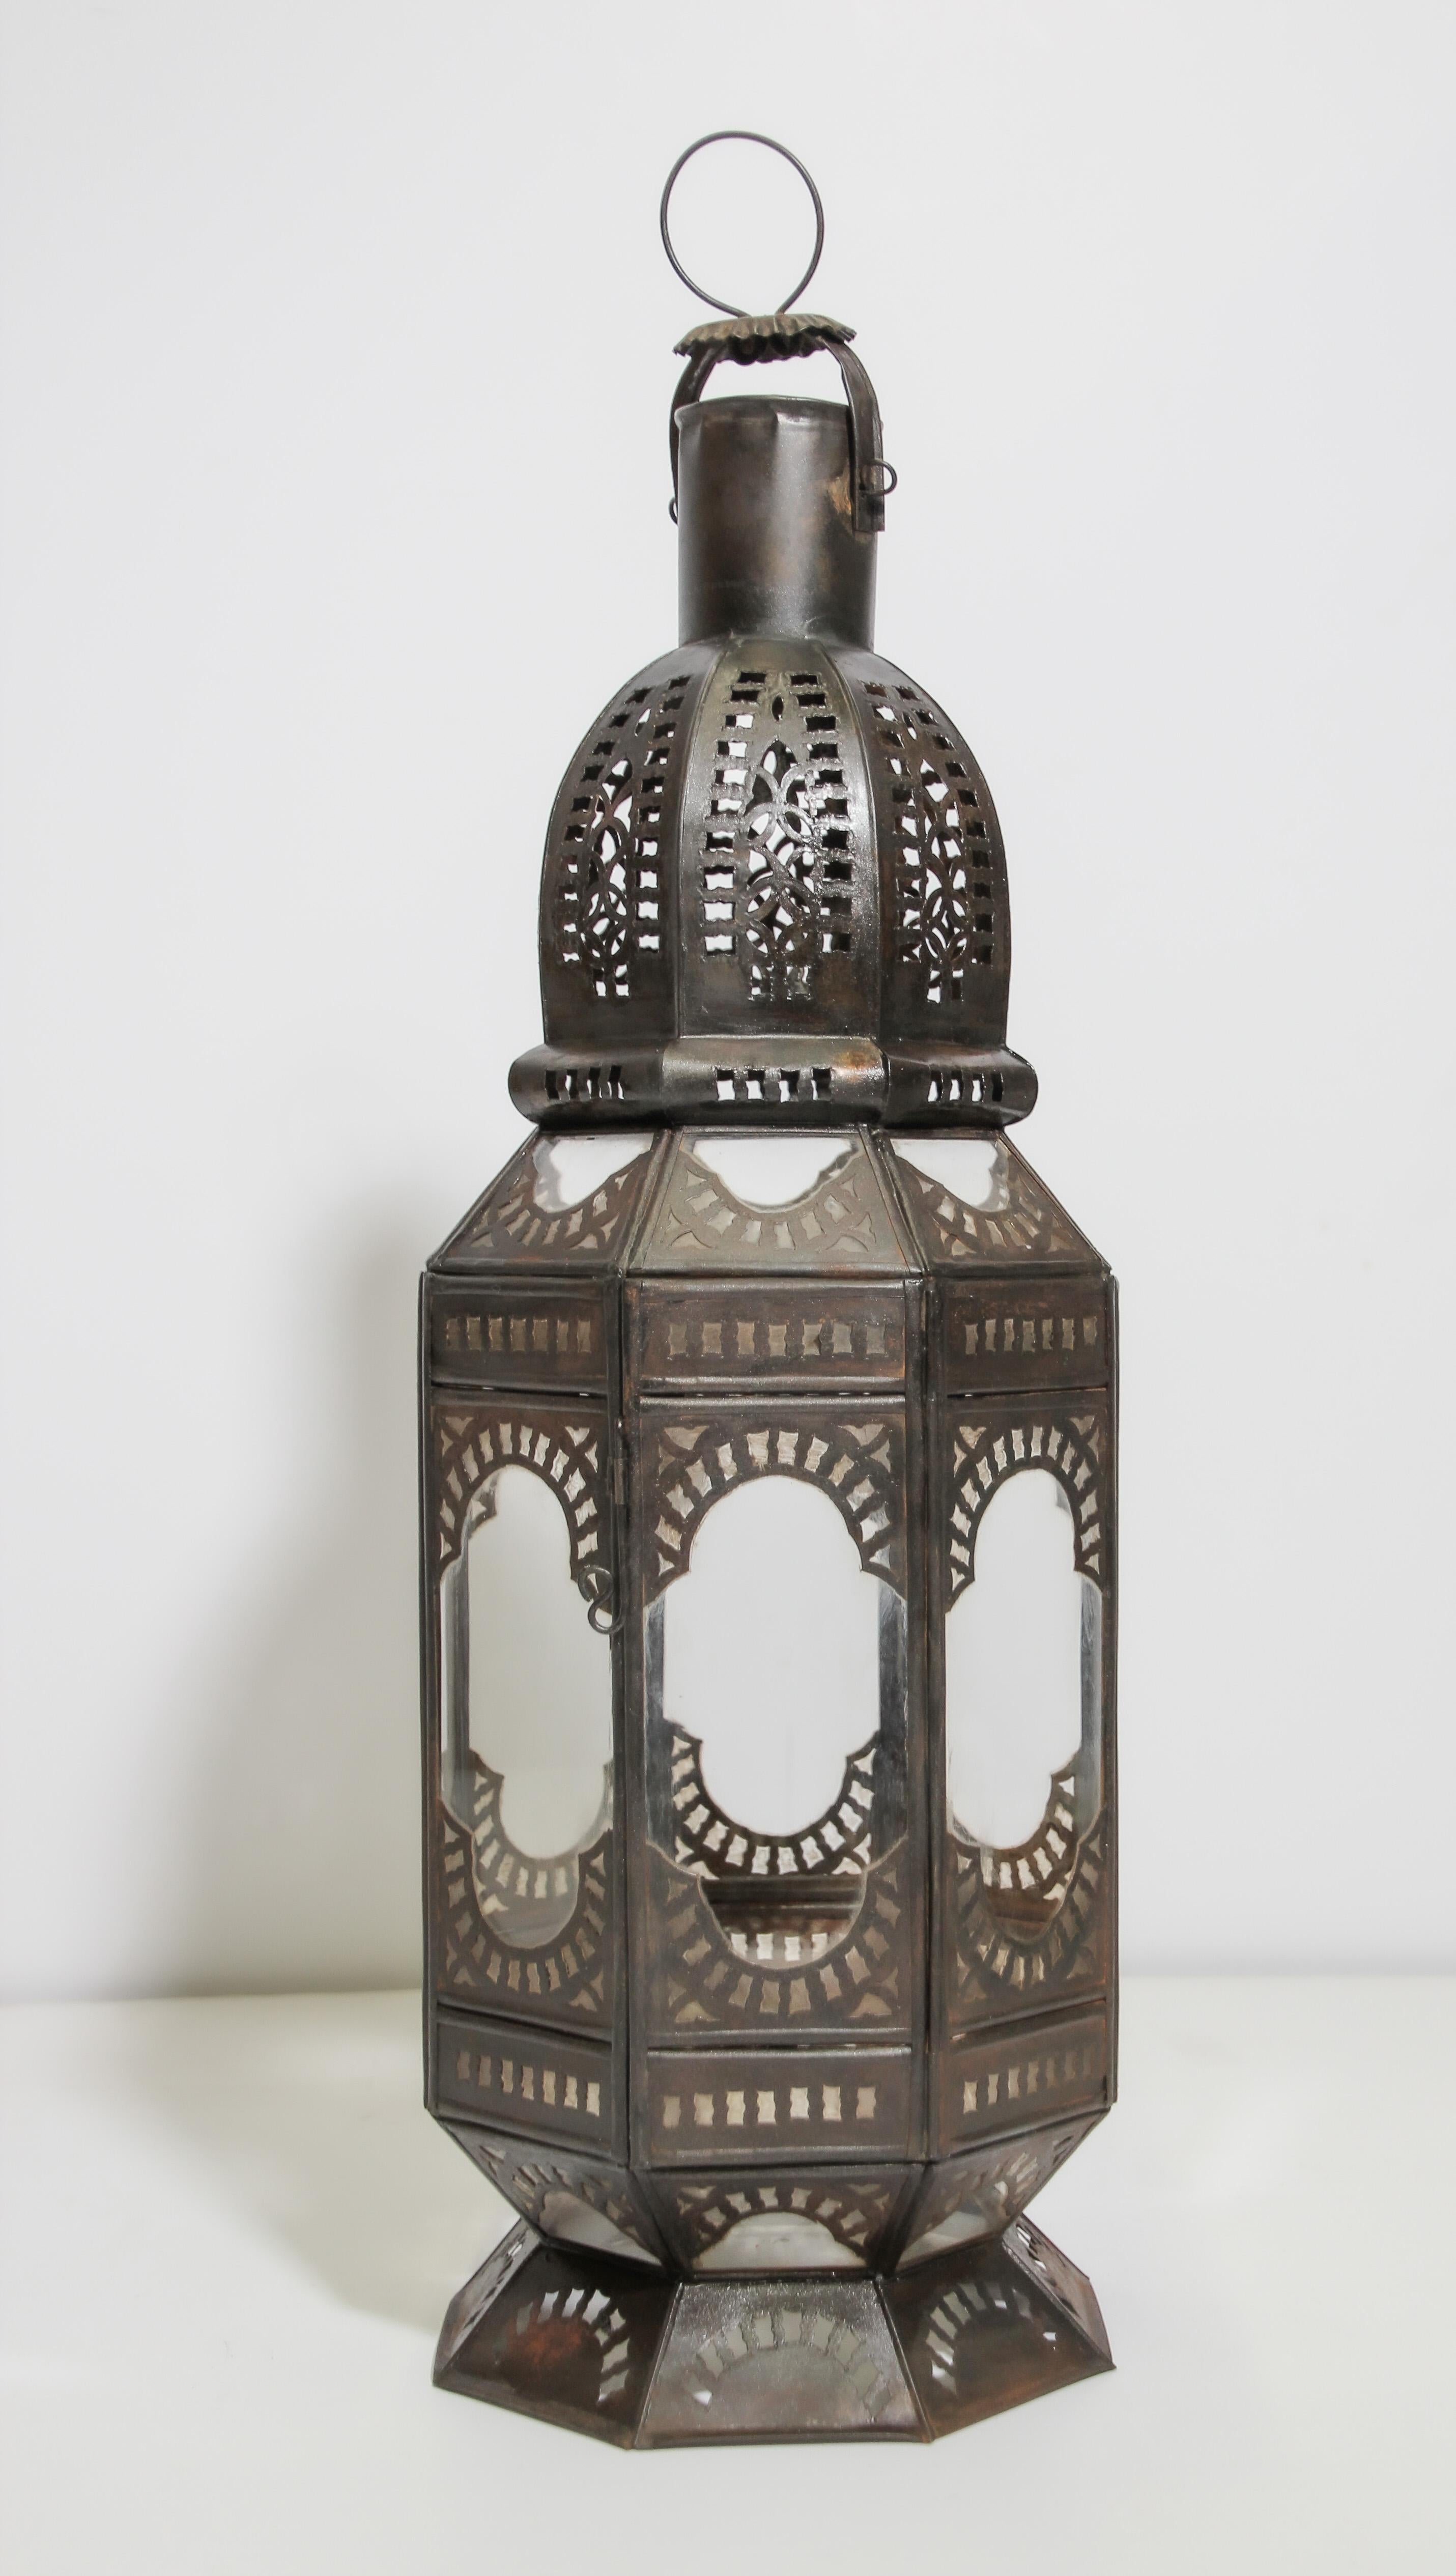 Handcrafted Moroccan clear glass lantern in octagonal shape adorned with hand-cut metal Moorish filigree designs. Hurricane candle lamp open metal work design with clear glass. There is a small door to access the inside. The lantern has a small door